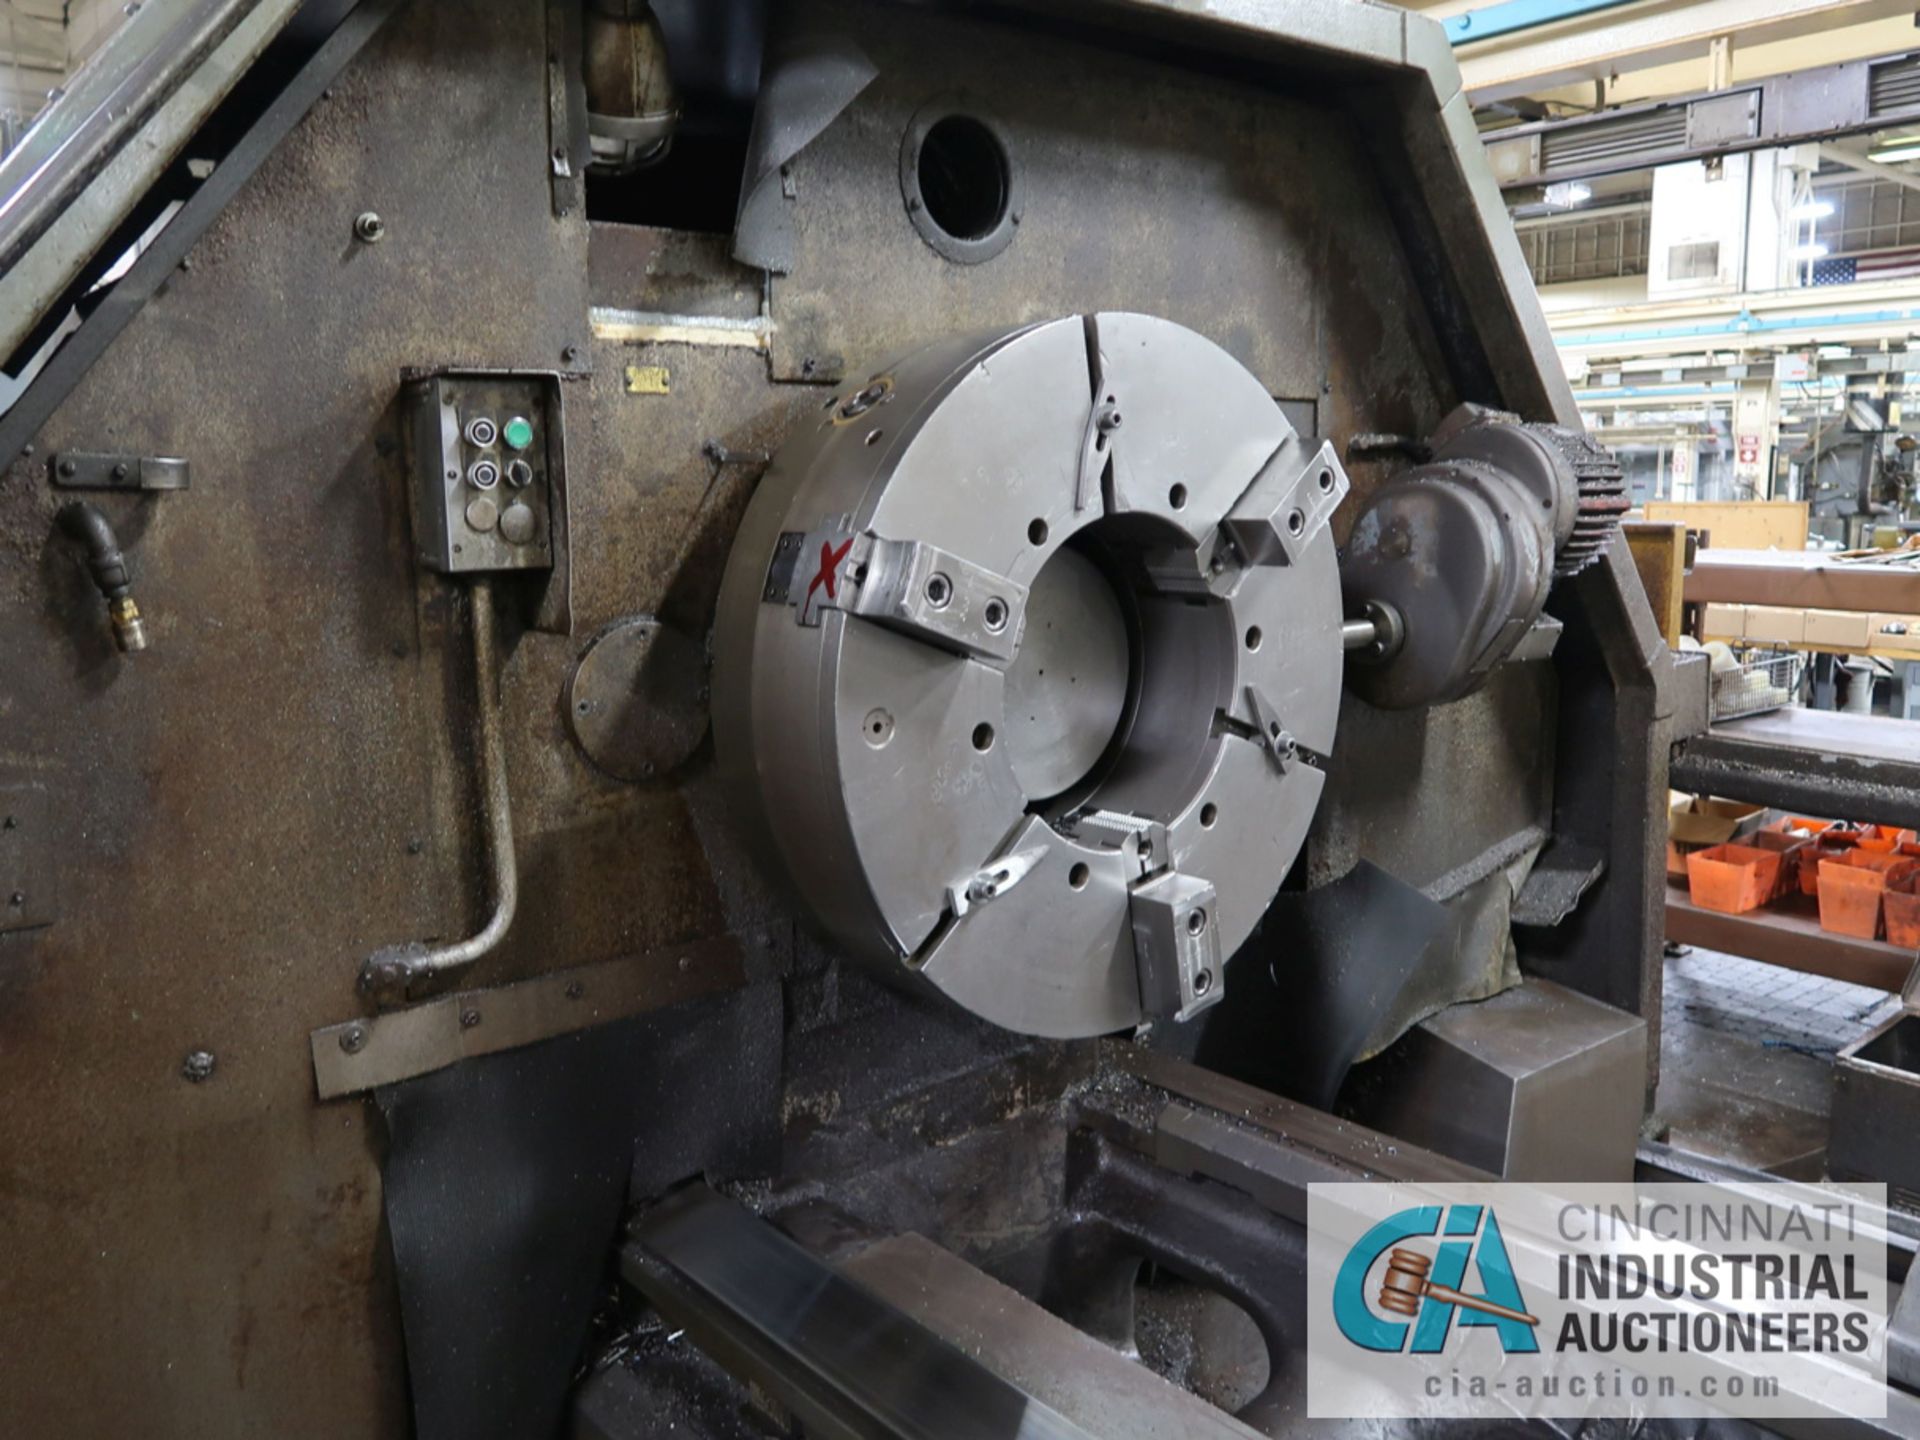 48” X 108” LEBLOND 15” HOLLOW SPINDLE MODEL 5029 N/C FLAT BED LATHE; GE 1050 CONTROL, 32” CHUCK, - Image 9 of 22